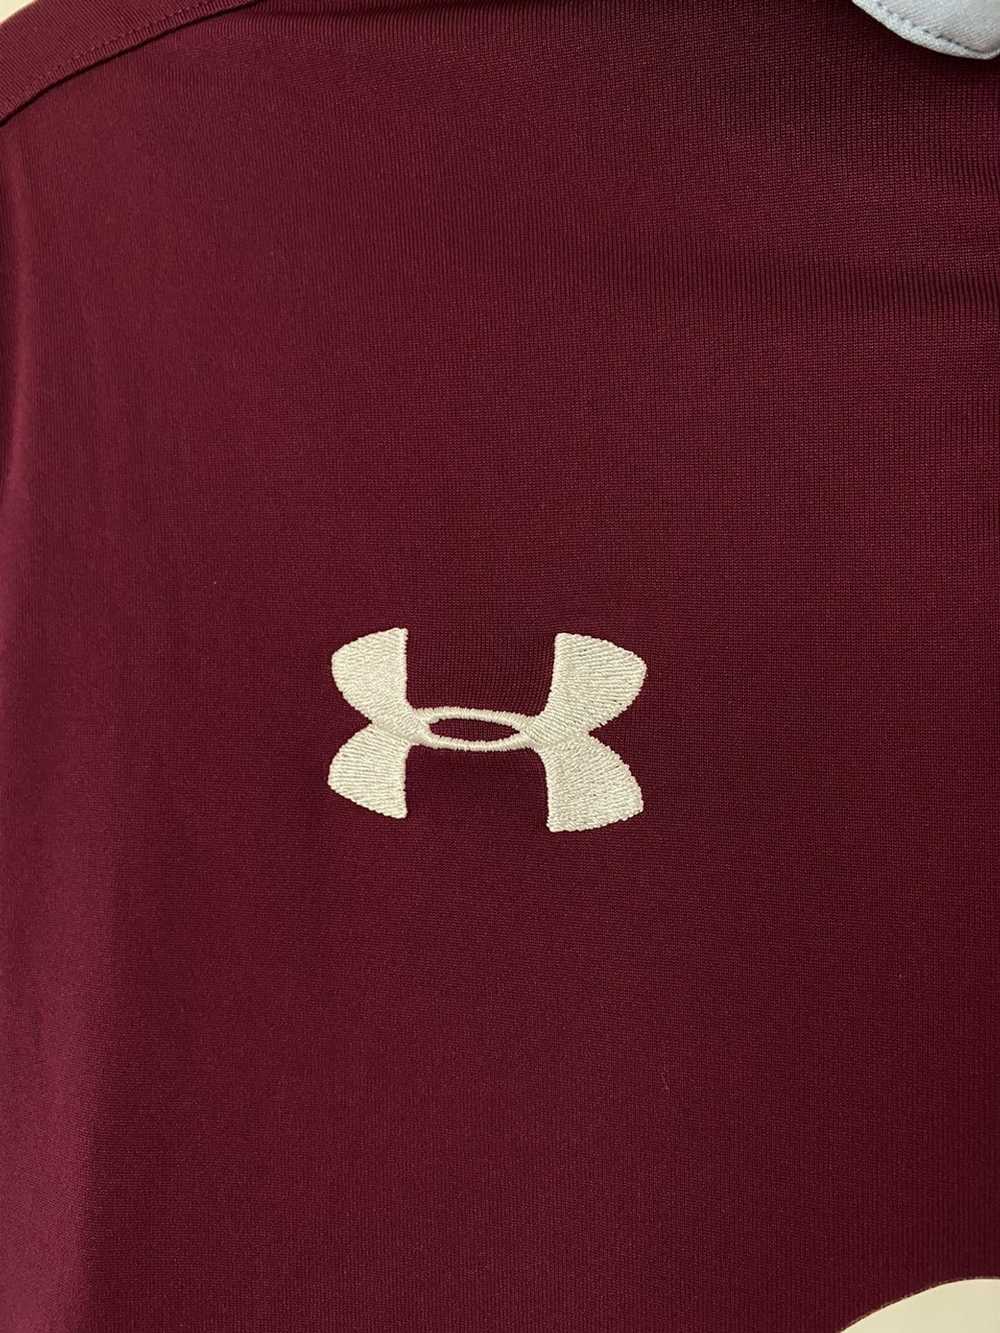 Soccer Jersey × Under Armour 🏴󠁧󠁢󠁥󠁮󠁧󠁿 Aston… - image 5